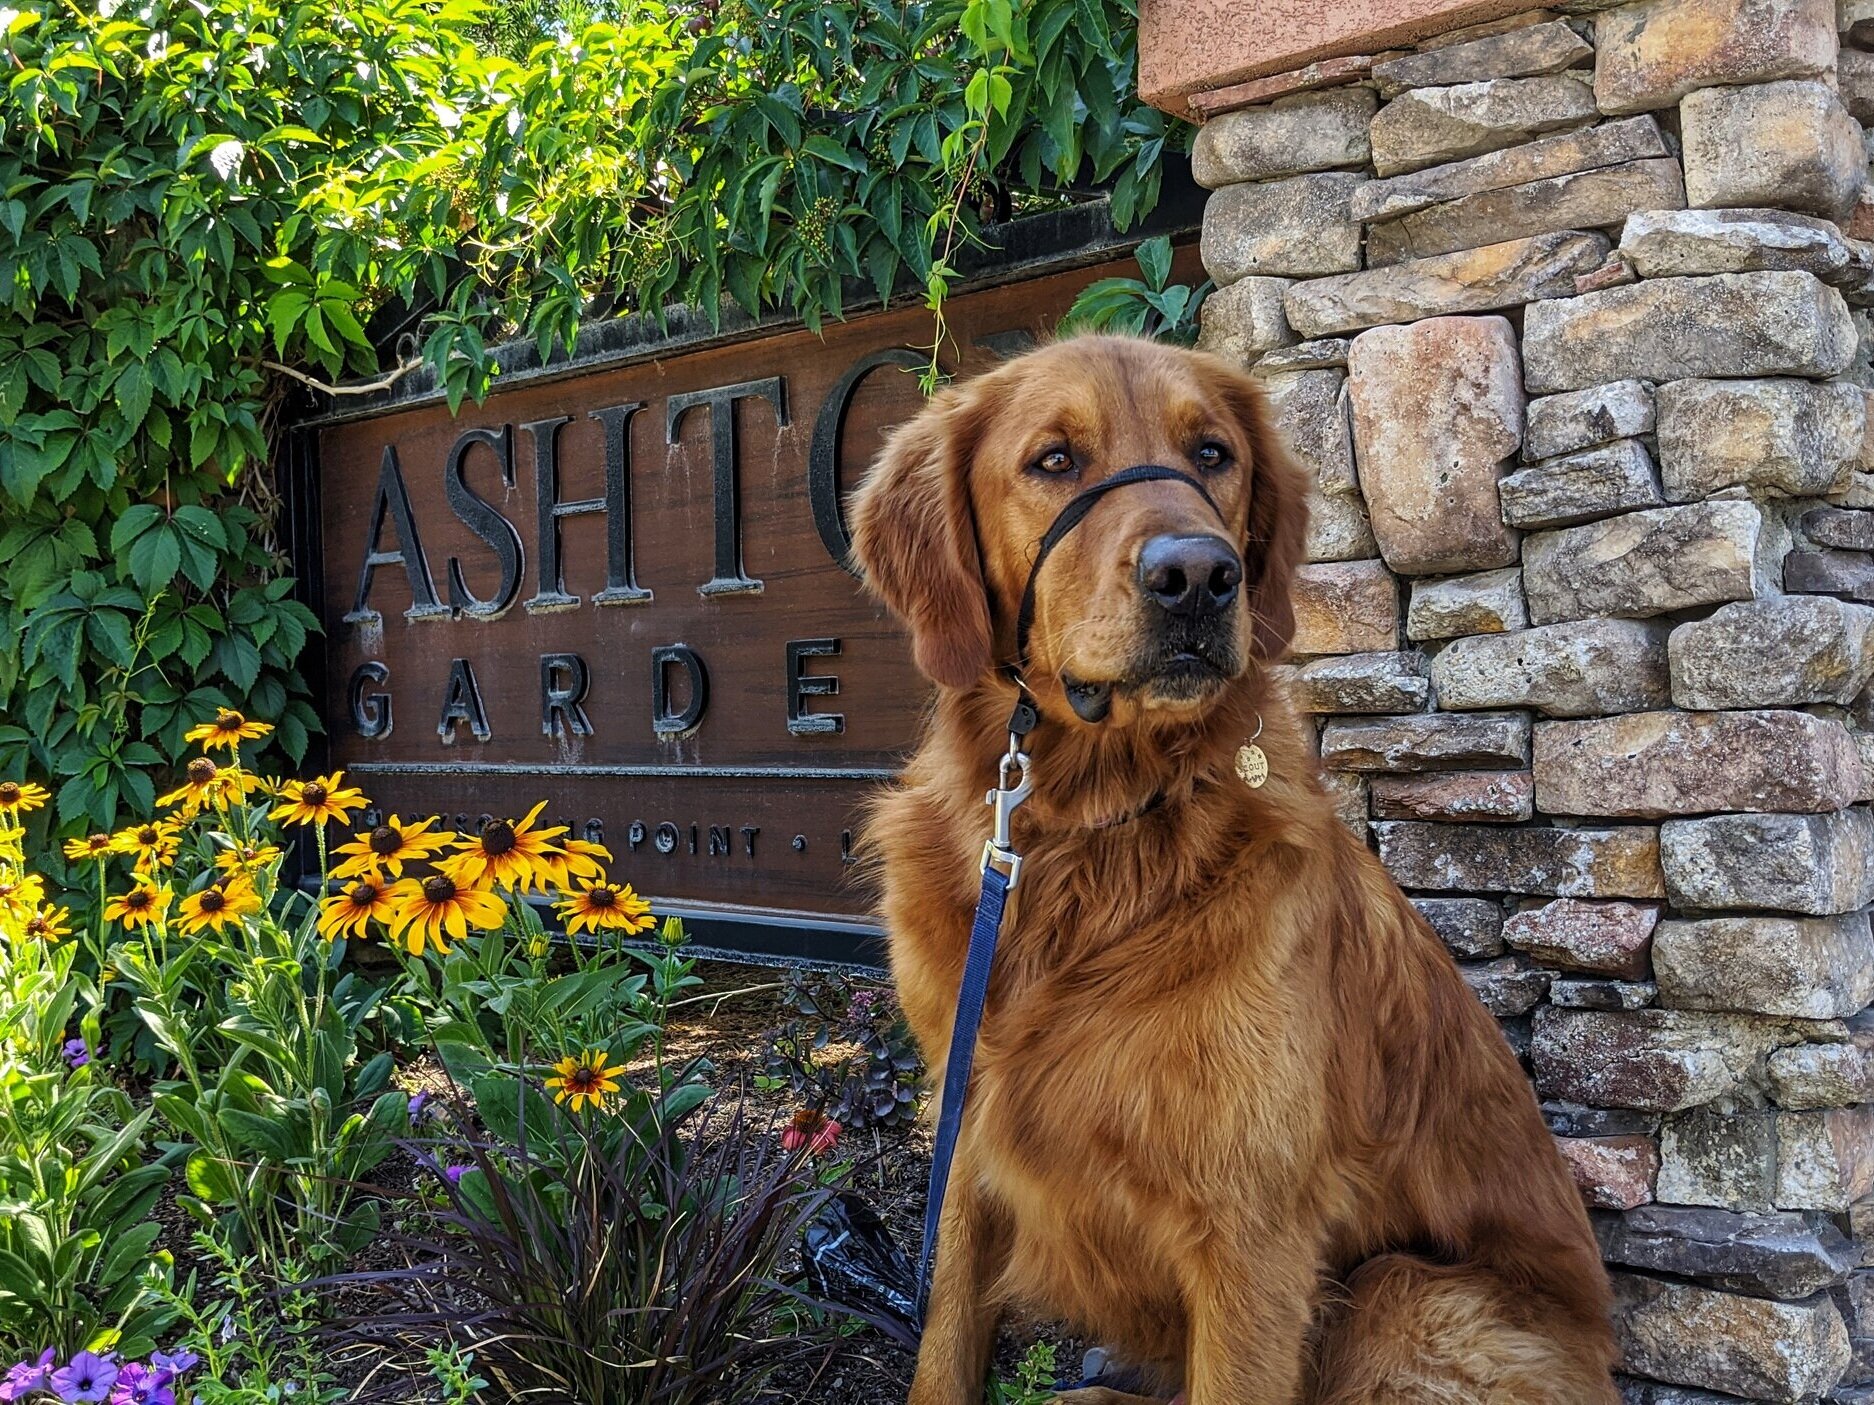 Scout sits in front of the wood and stone Ashton Gardens sign. There is ivy partially covering the sign and an array of summer flowers in front of it.